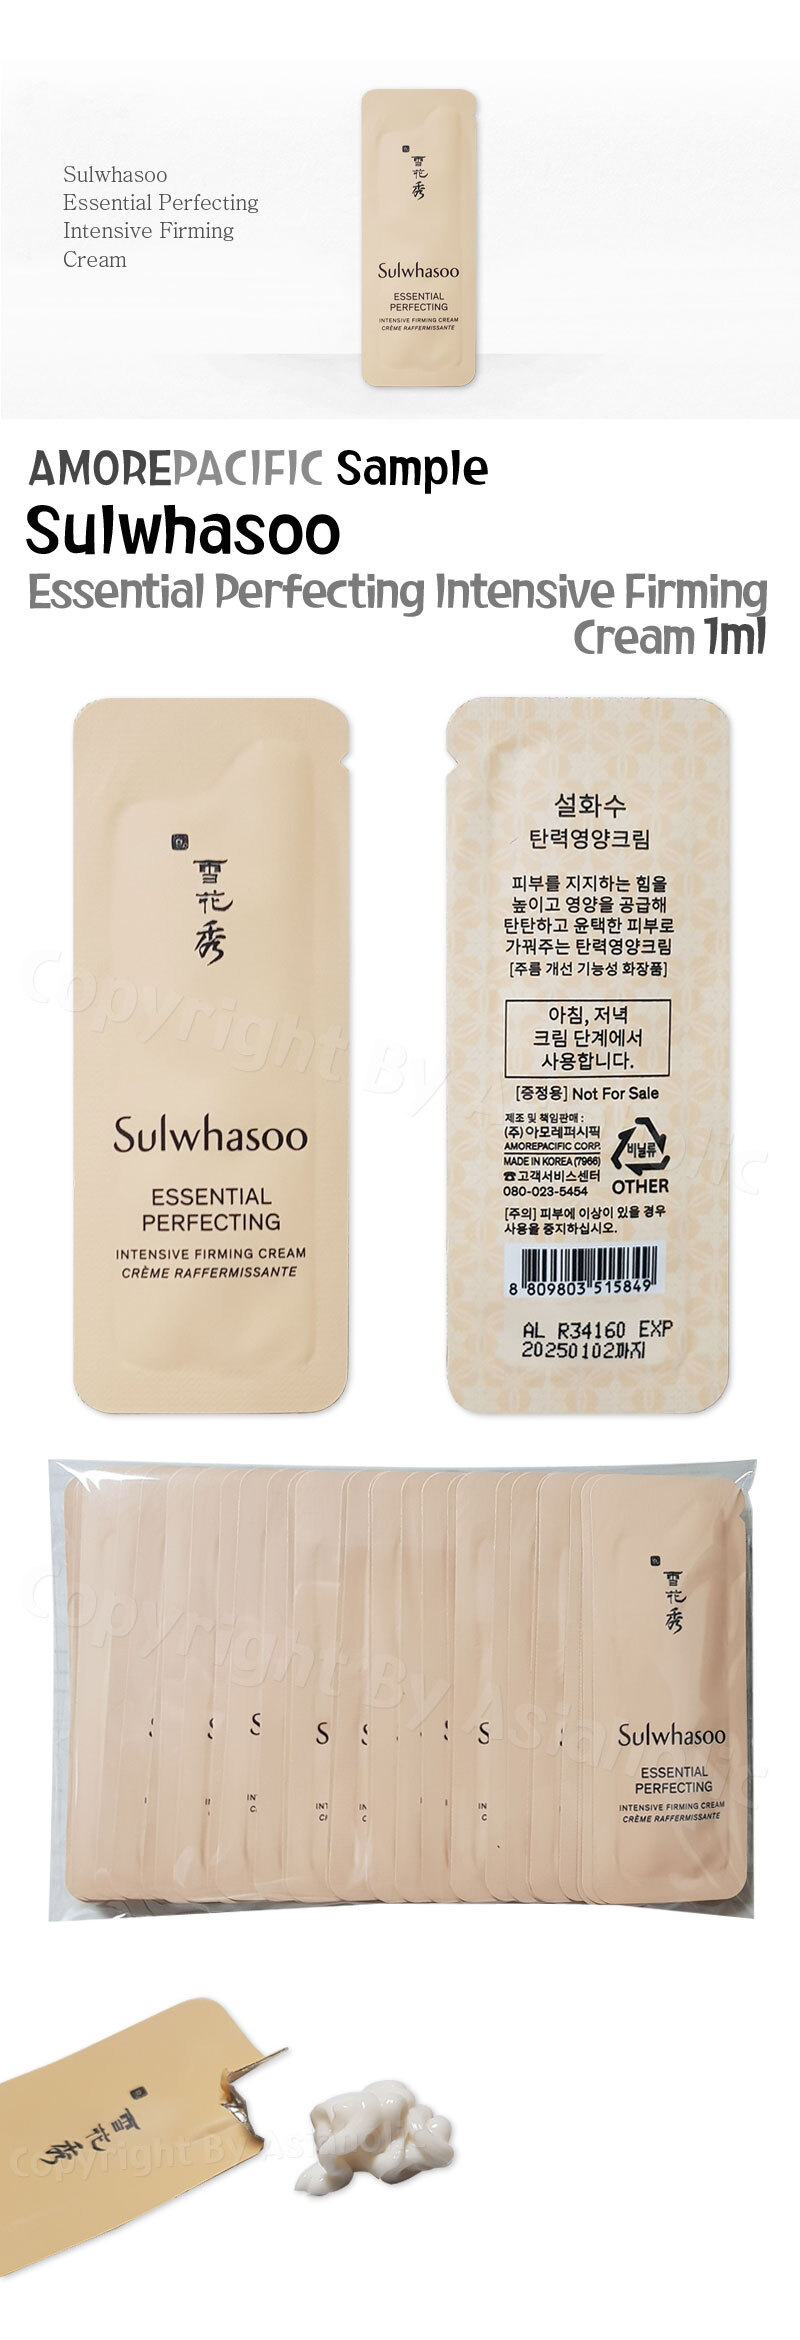 Sulwhasoo Essential Perfecting Intensive Firming Cream 1ml x 130pcs (130ml) Newest Version